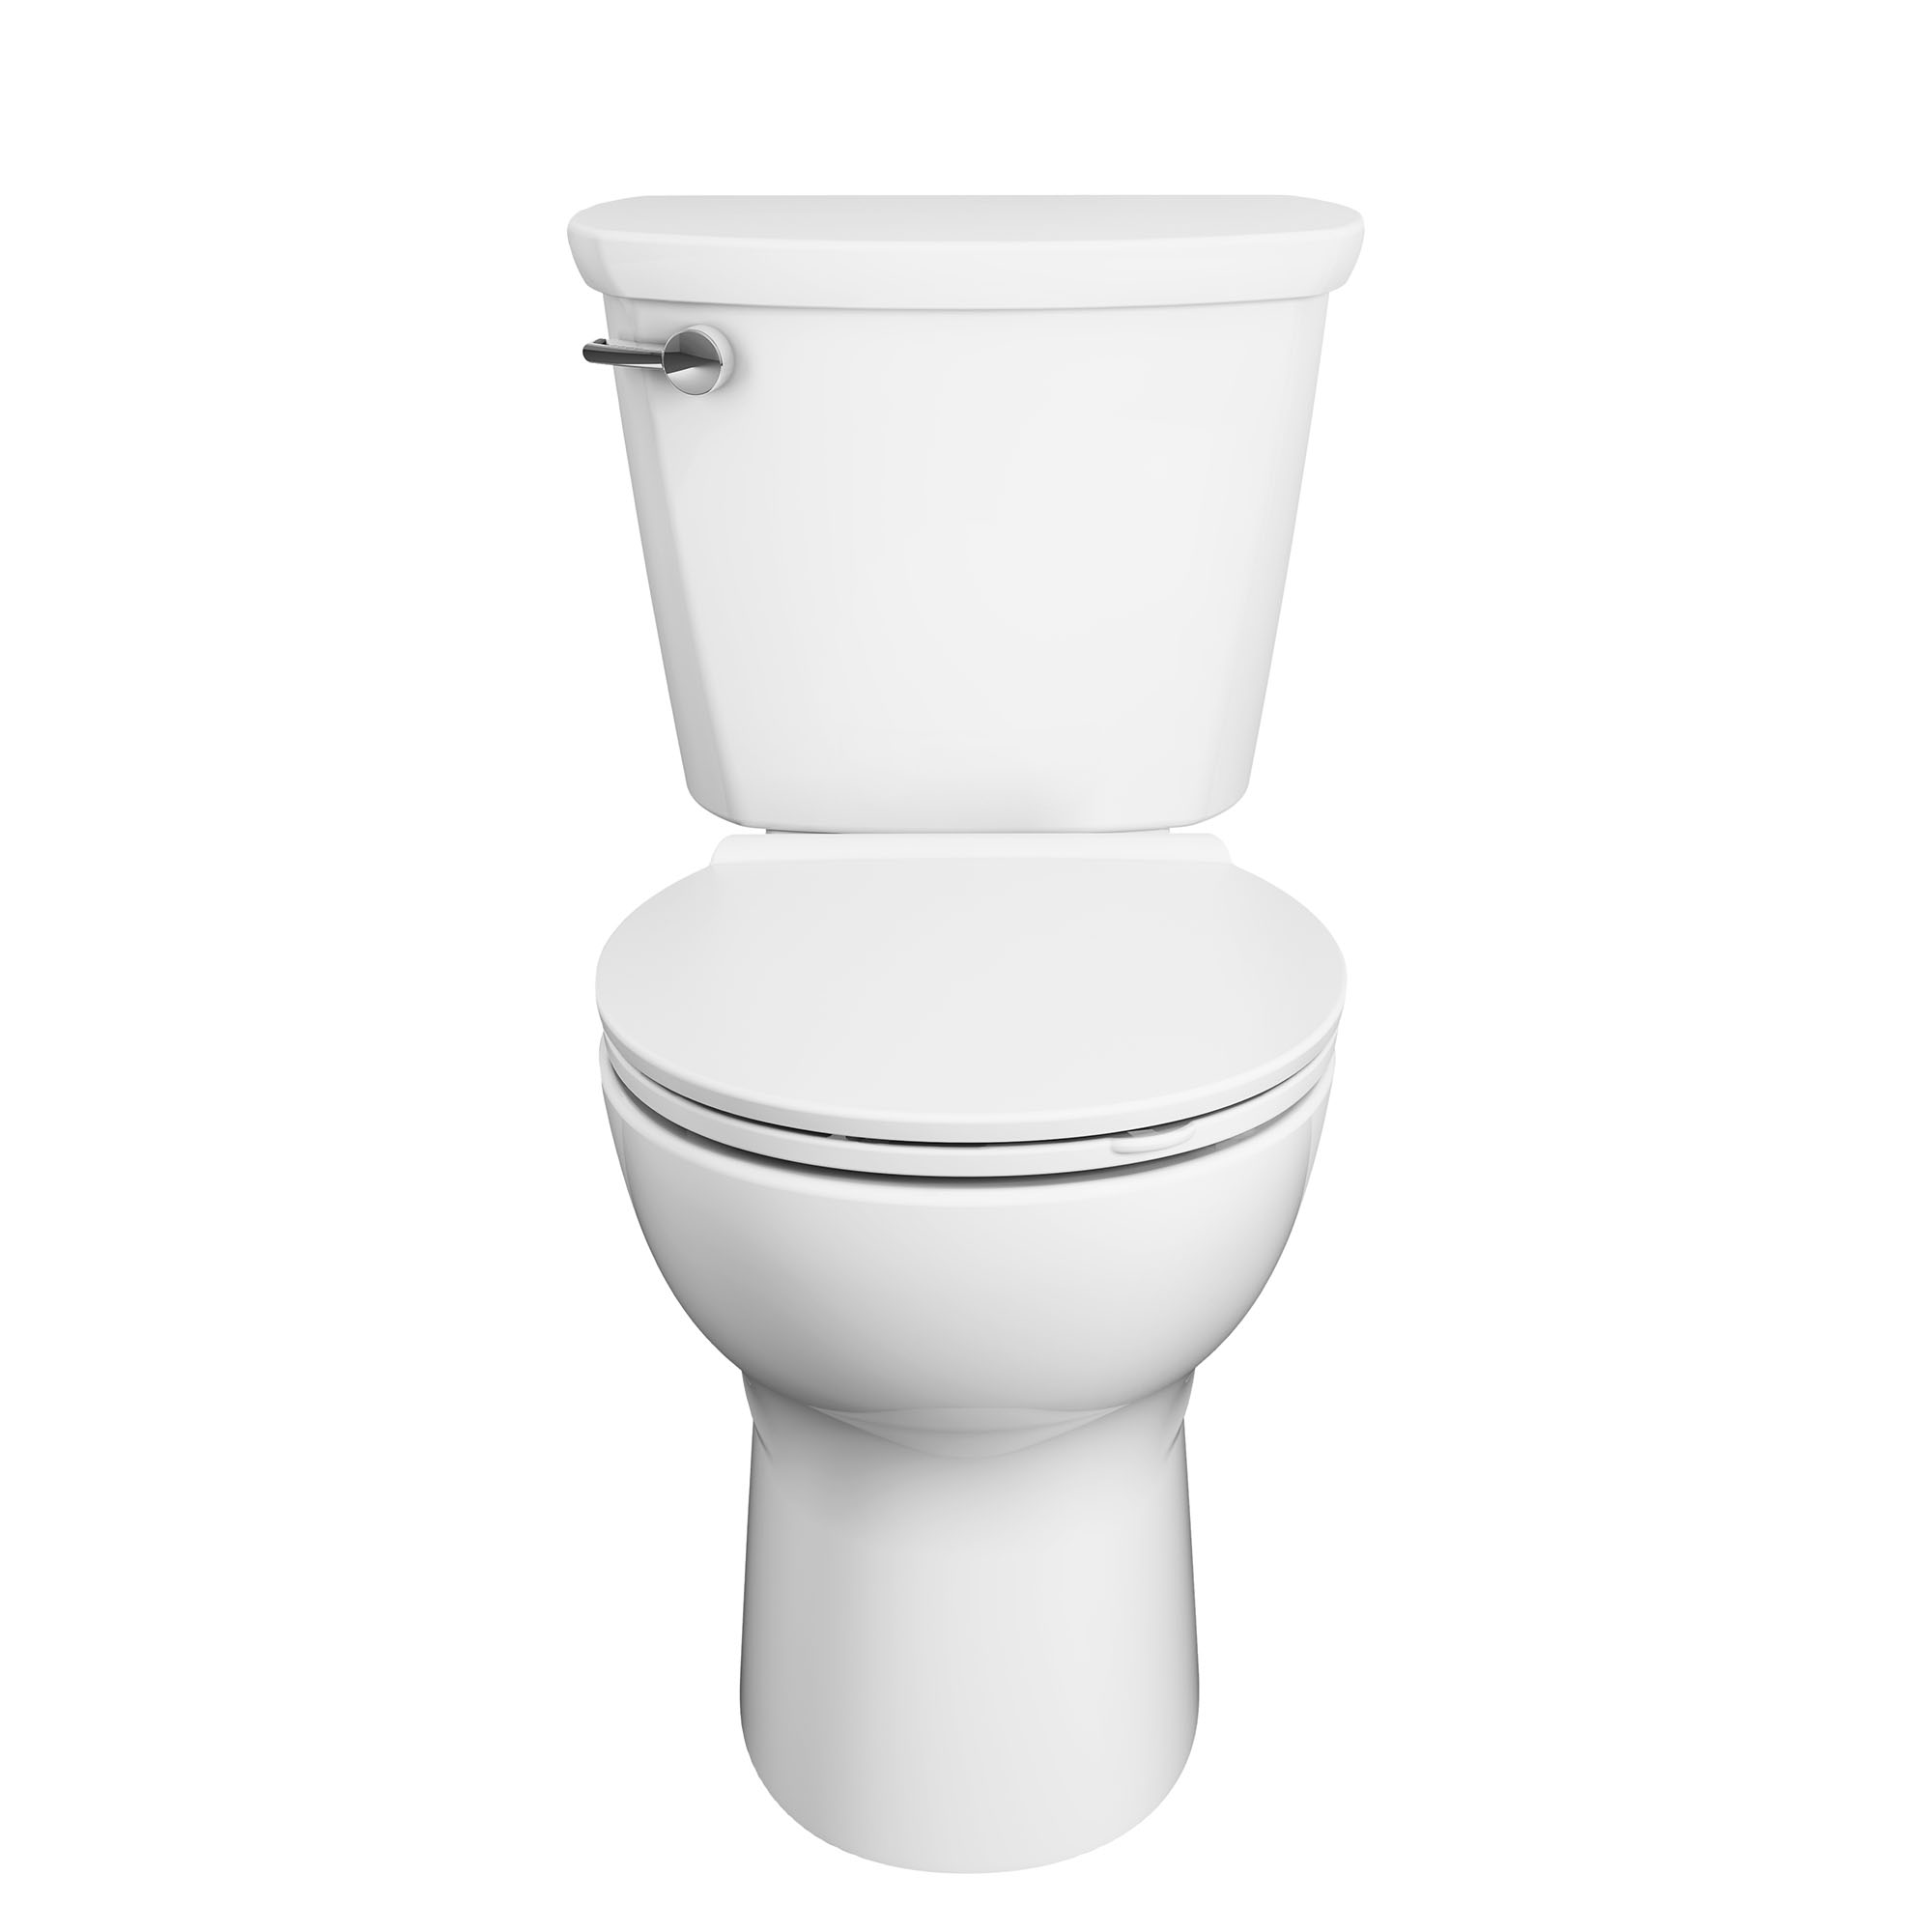 Cadet® PRO Two-Piece 1.6 gpf/6.0 Lpf Standard Height Round Front Toilet Less Seat